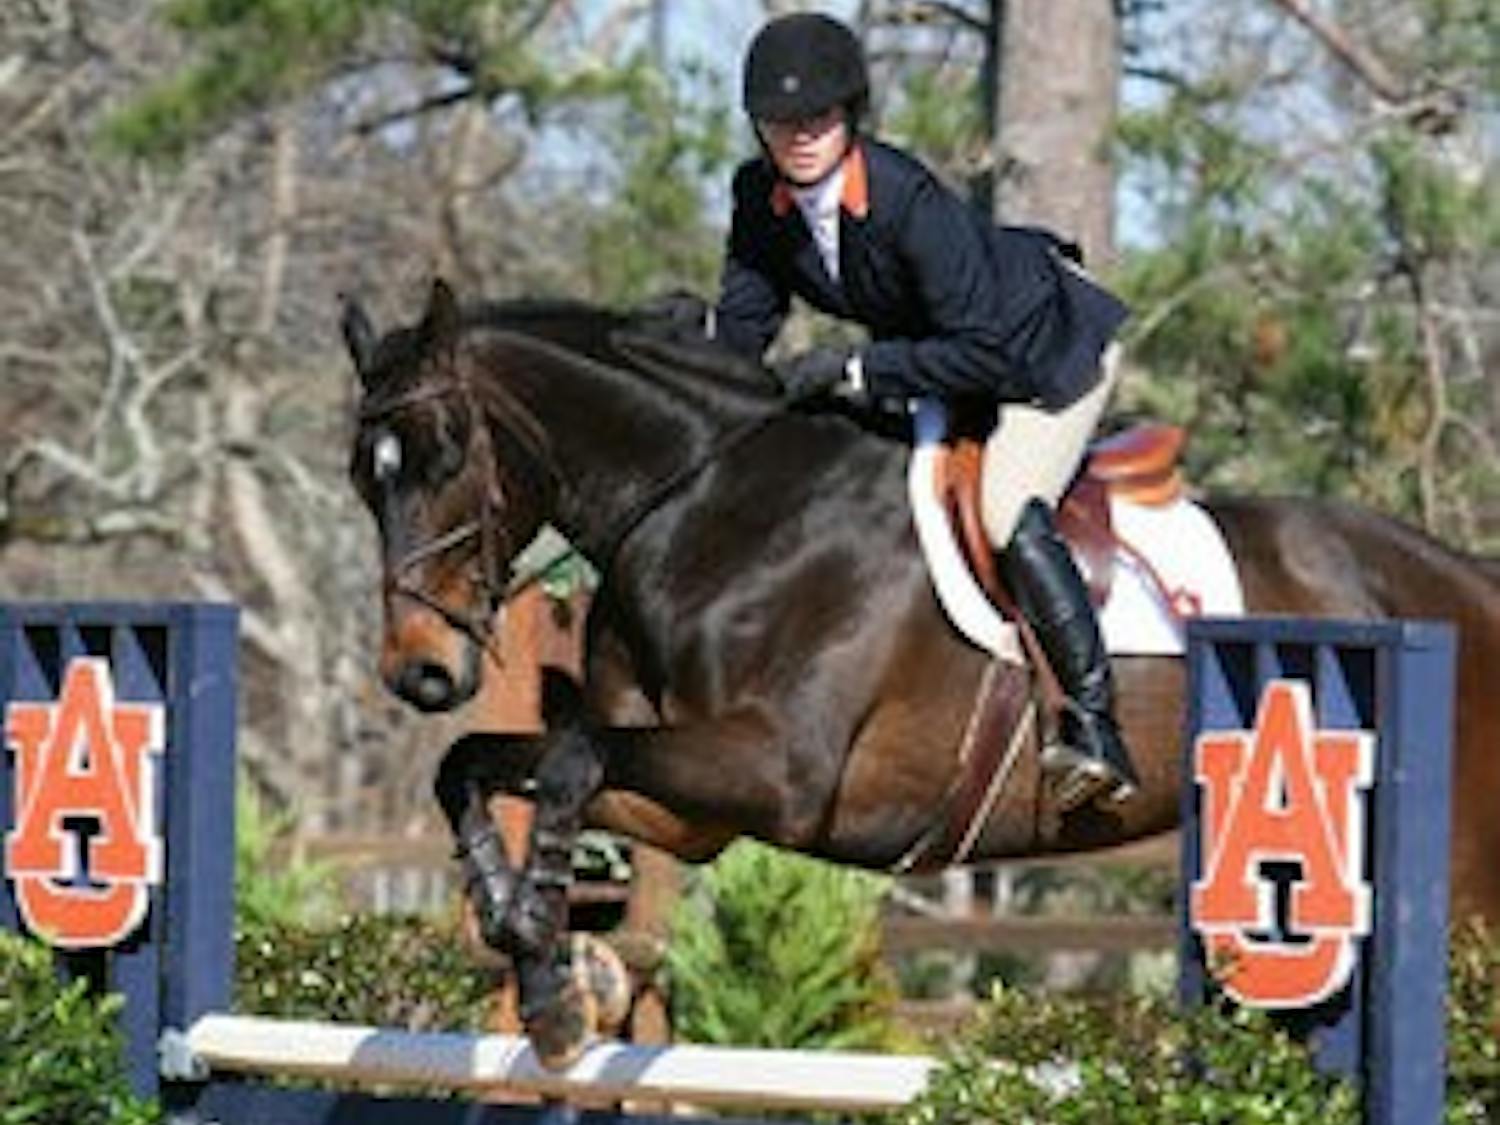 Senior hunt seat rider Maggie McAlary rides against Oklahoma State. The top-ranked equestrian team will compete at home Saturday against No. 3 Georgia, the only team to beat the Tigers this season. (Rebecca Croomes / PHOTO EDITOR)